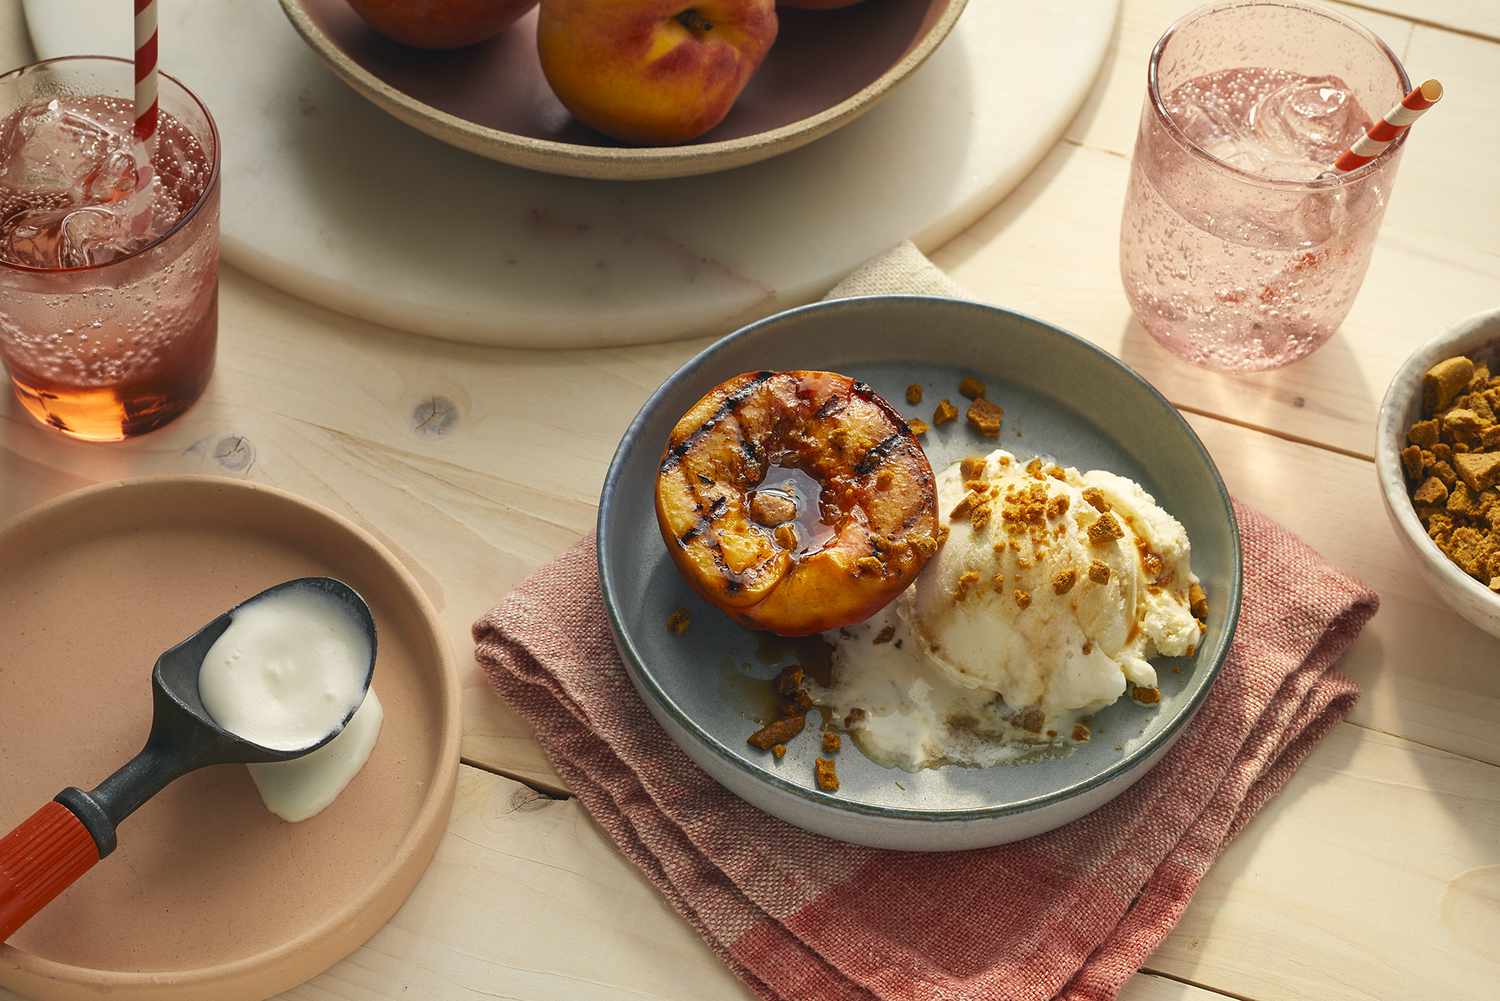 A beautifully grilled peach served with a melting scoop of vanilla ice cream and crumbled gingersnap cookies